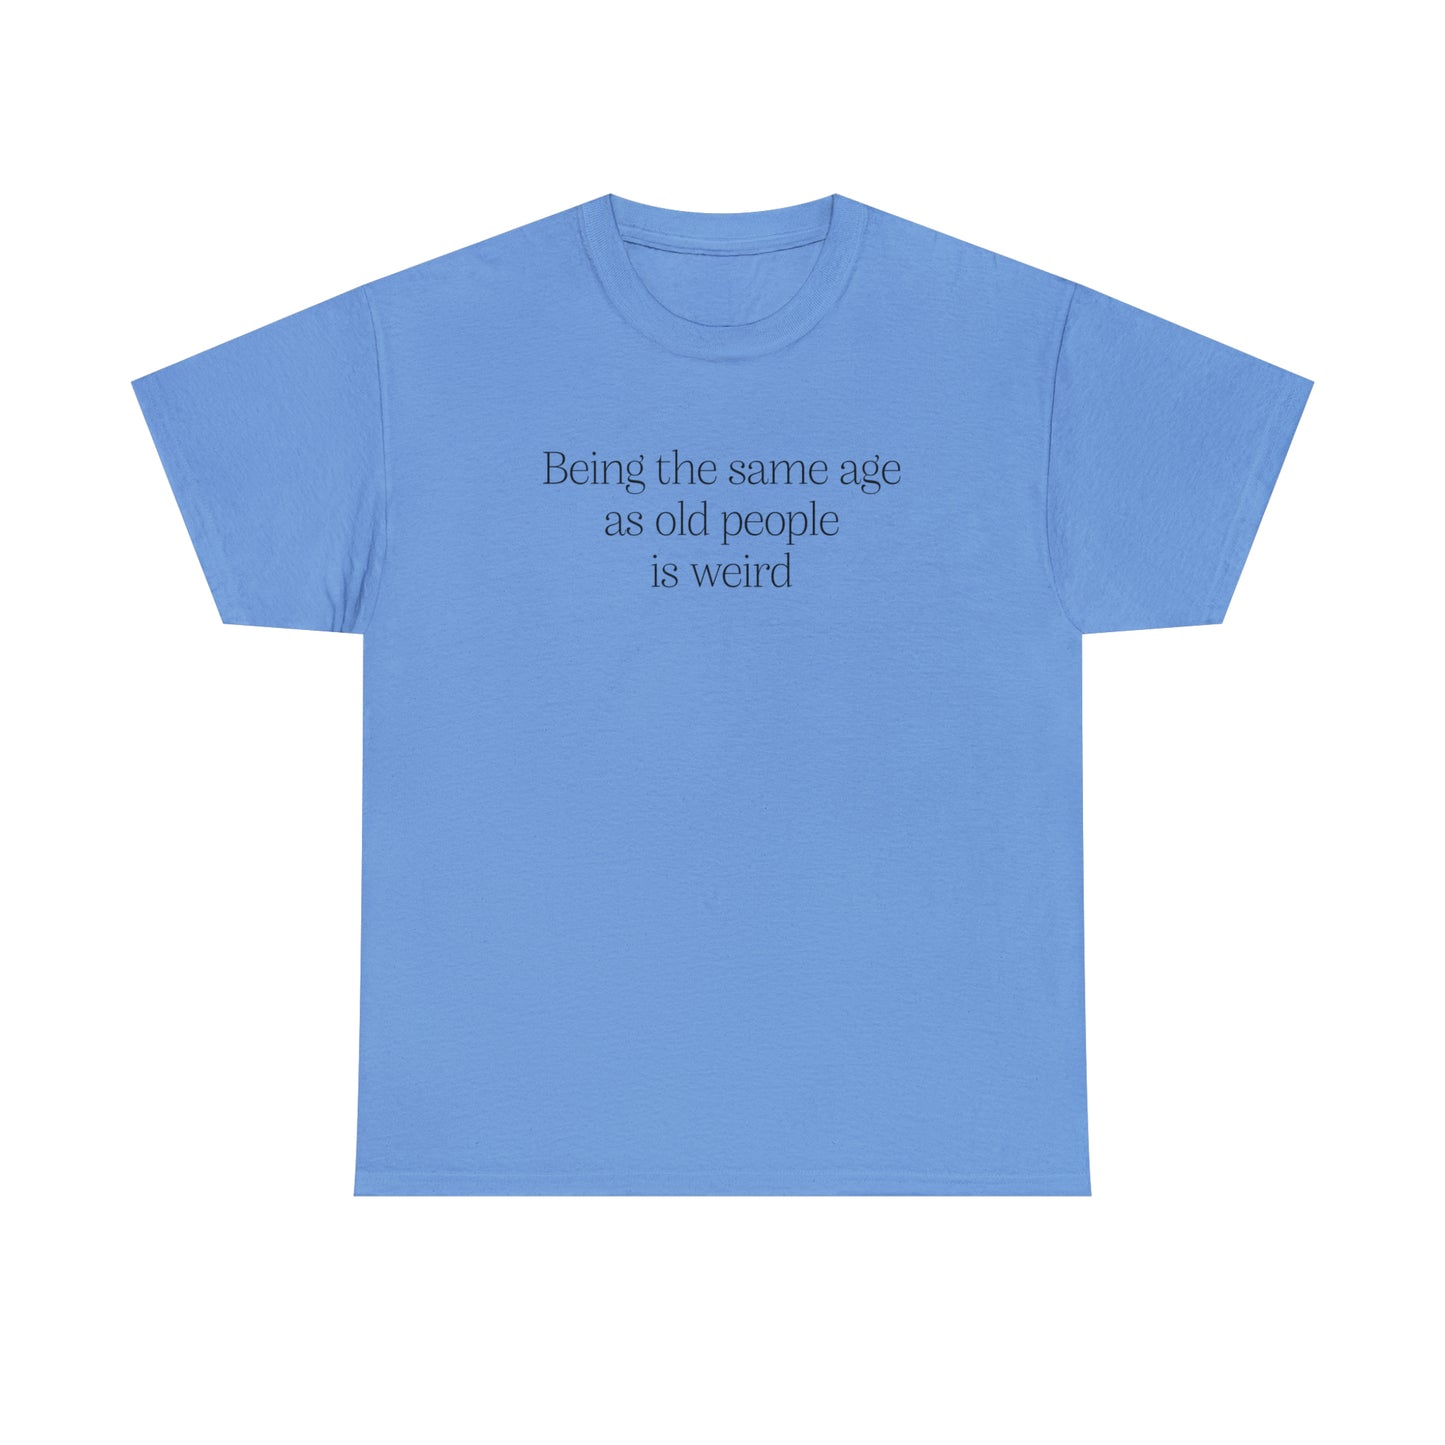 Old People T-Shirt For Sarcastic TShirt For Funny T Shirt For Satire Shirt For Ironic Tee For Birthday Gift For Adult Tee